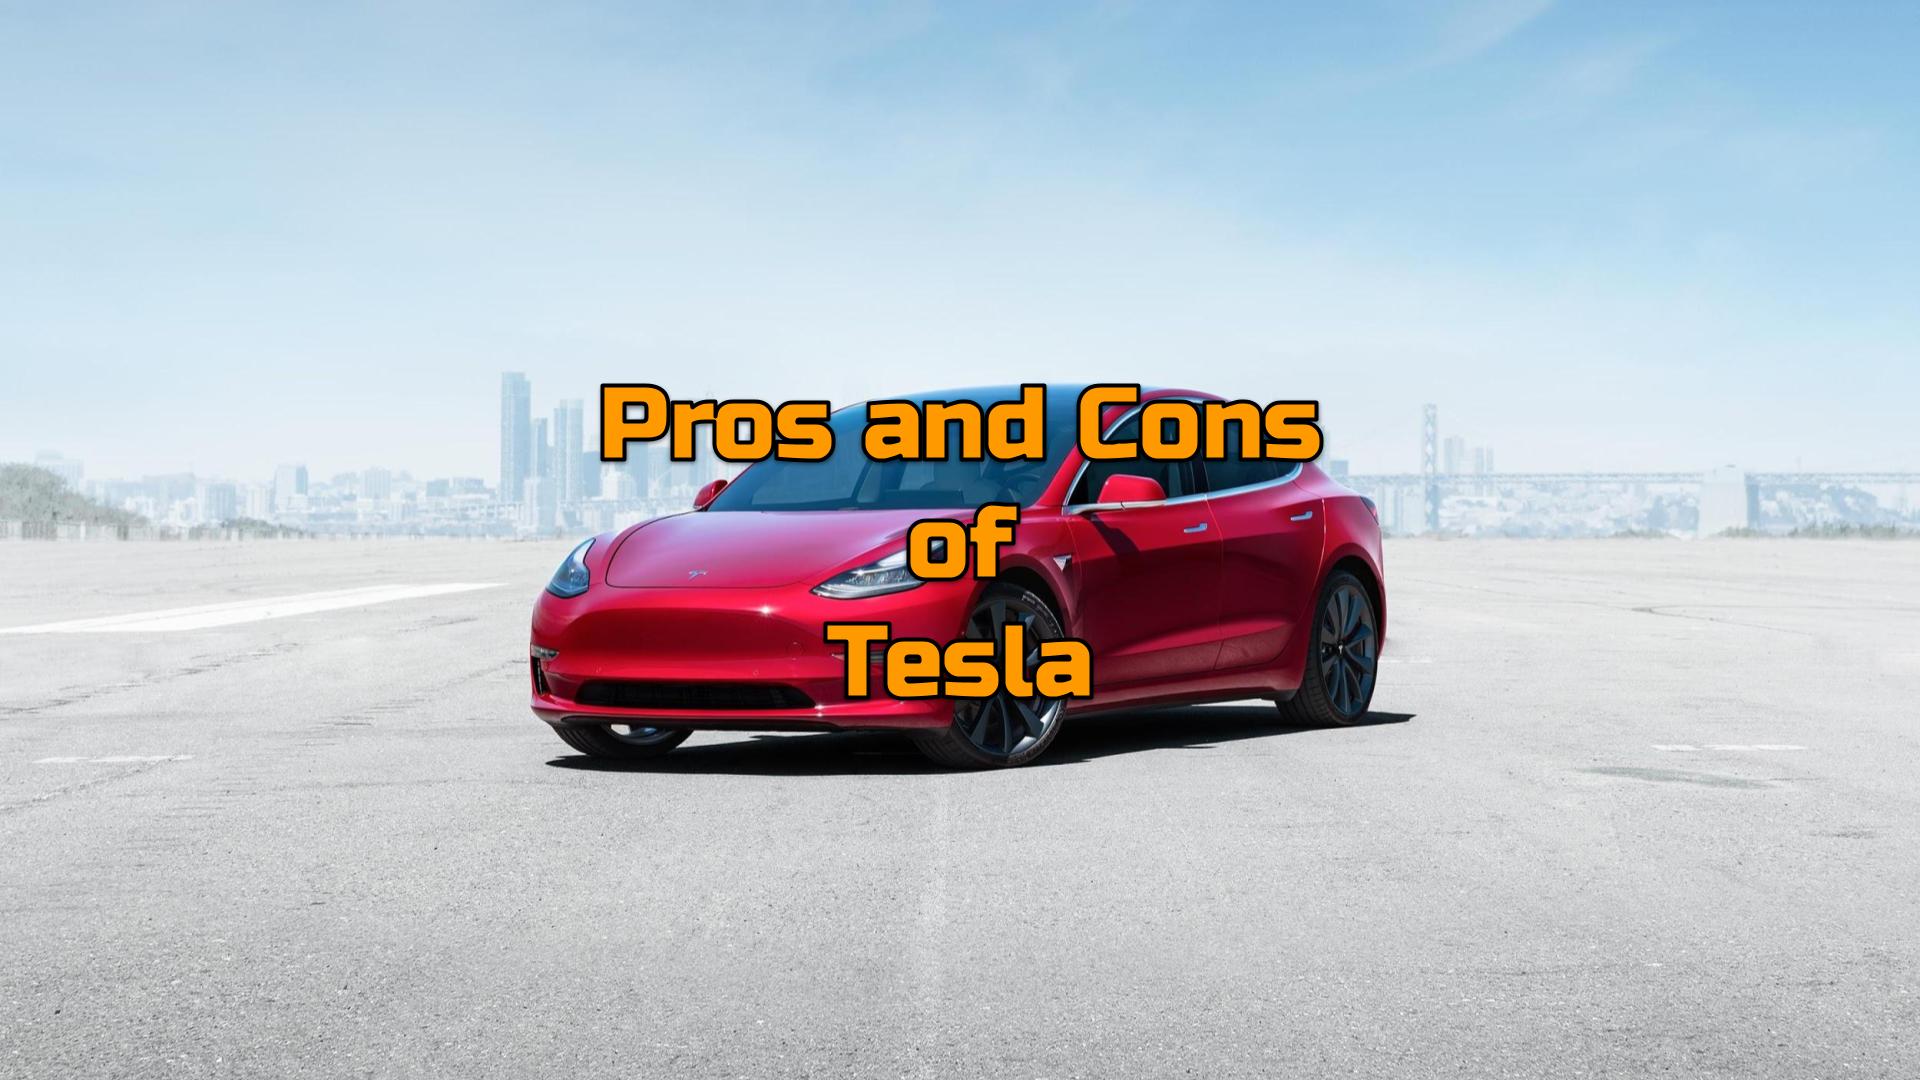 Pros And Cons Of Tesla Things You Should Know Provscons 1239